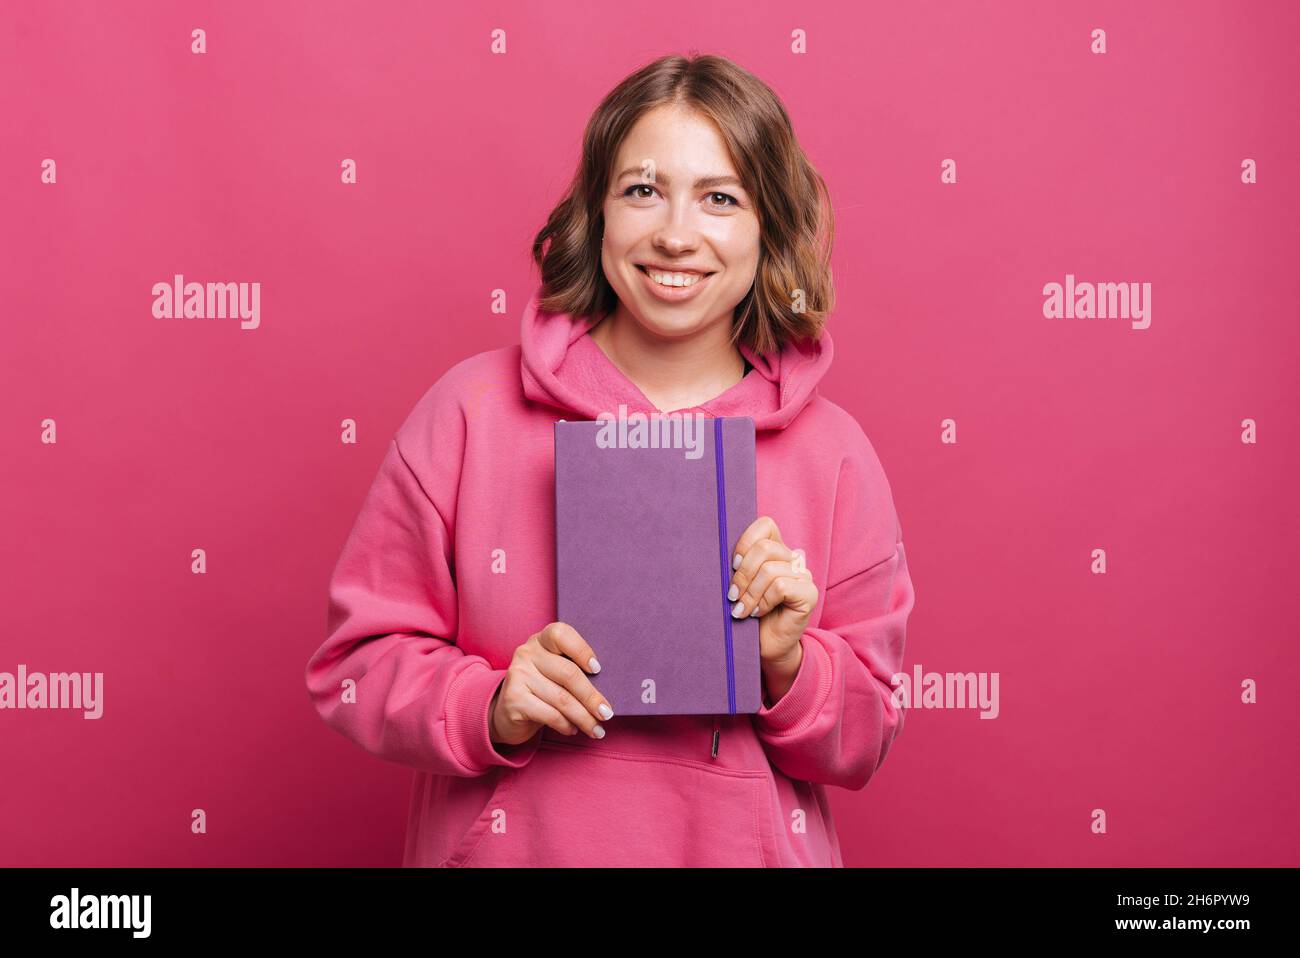 Portrait of young cheerful woman holding agenda planner over pink background. Stock Photo